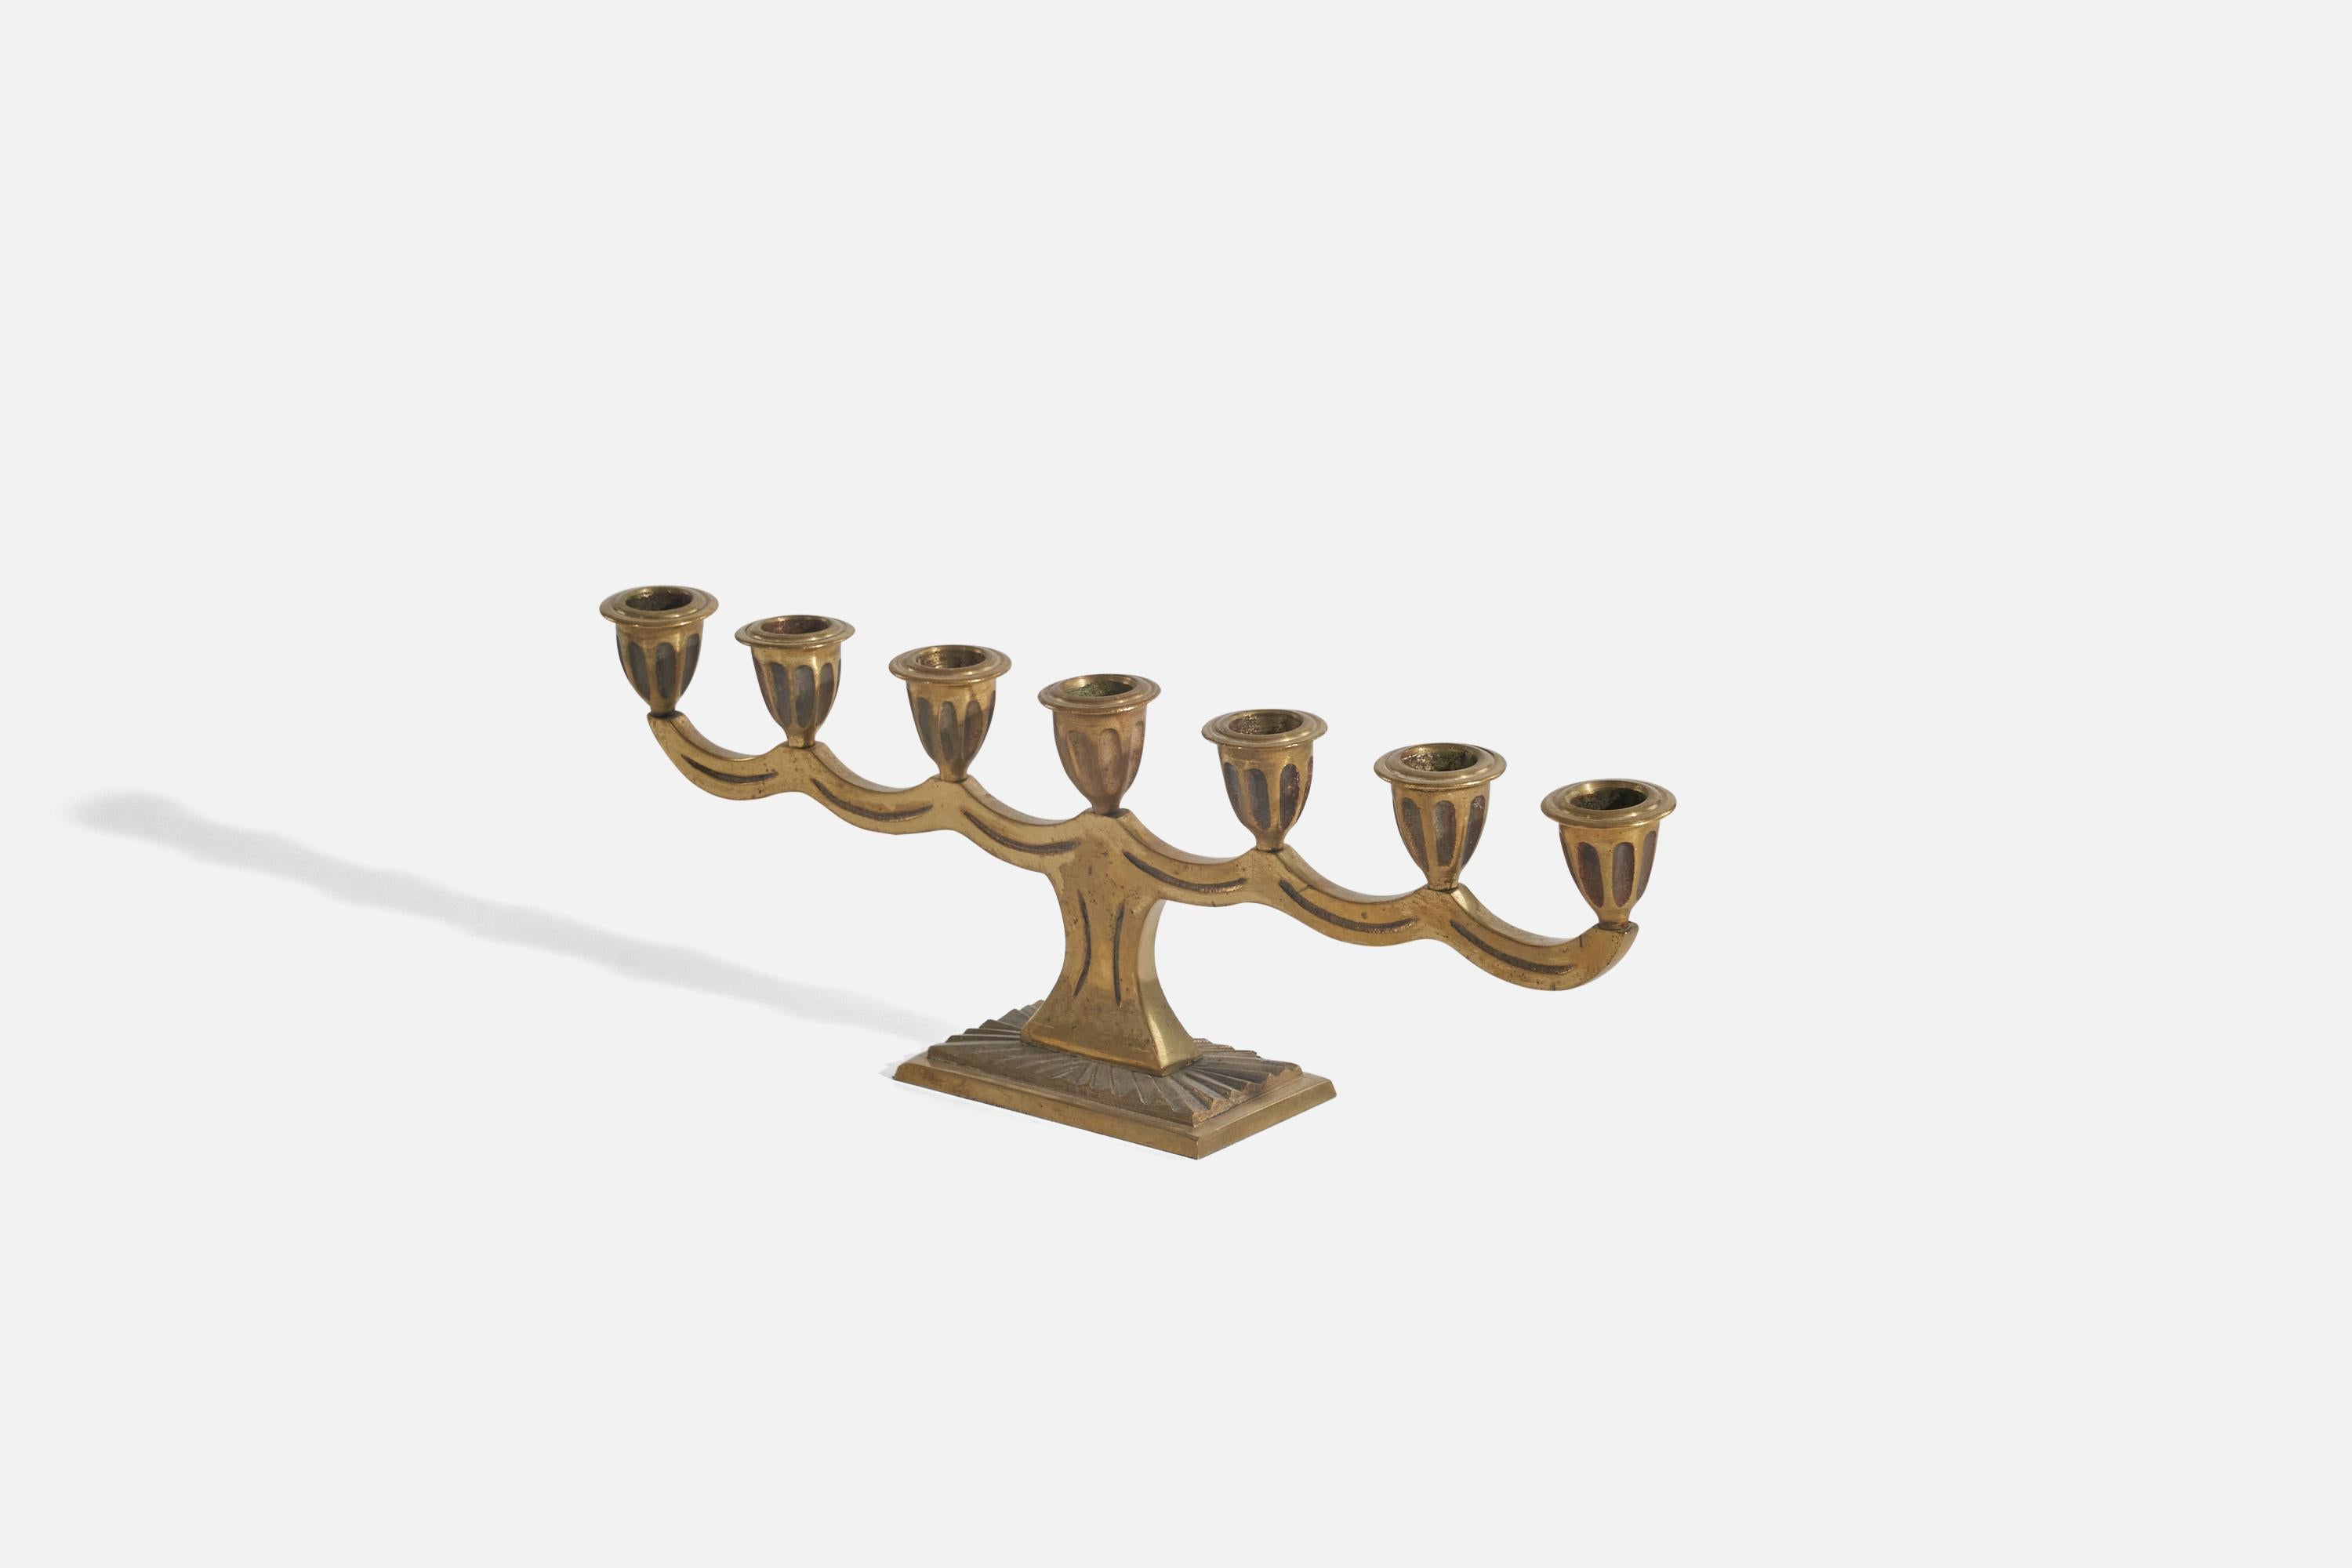 A brass, 7-candle candelabra designed and produced in Sweden, circa 1940s. With foundry stamp N.M.
  